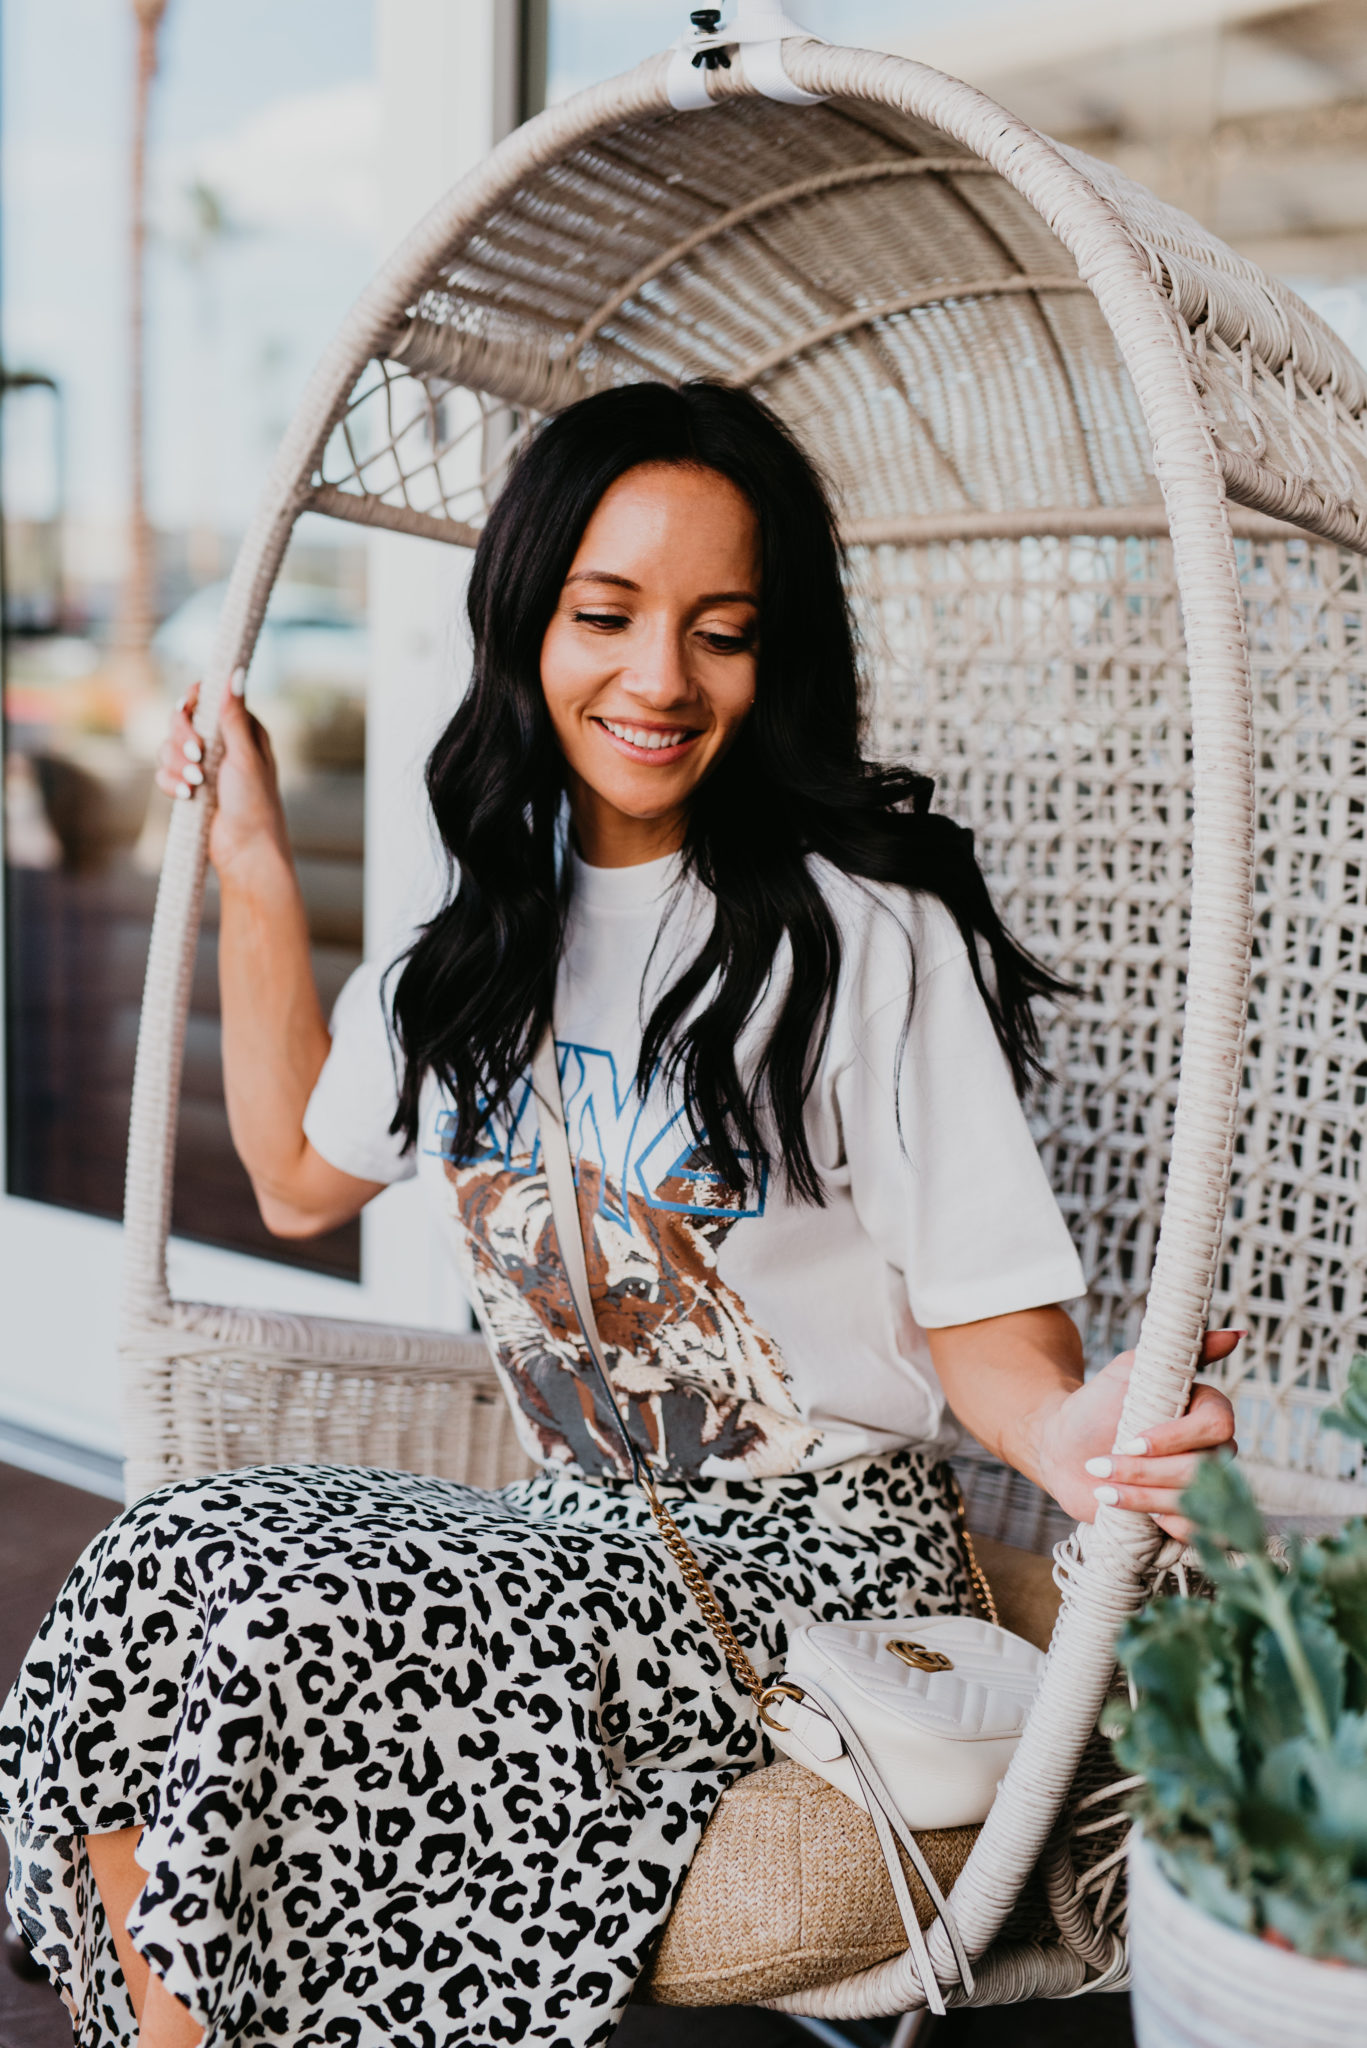 How to Wear a Graphic Tee this Fall, styling tips featured by top US fashion blog, Outfits & Outings: image of a woman wearing an Anime Bing tiger graphic tee, Aqua slip skirt, Gucci GG Marmont Matelasse, Marc Fisher platform wedge espadrilles